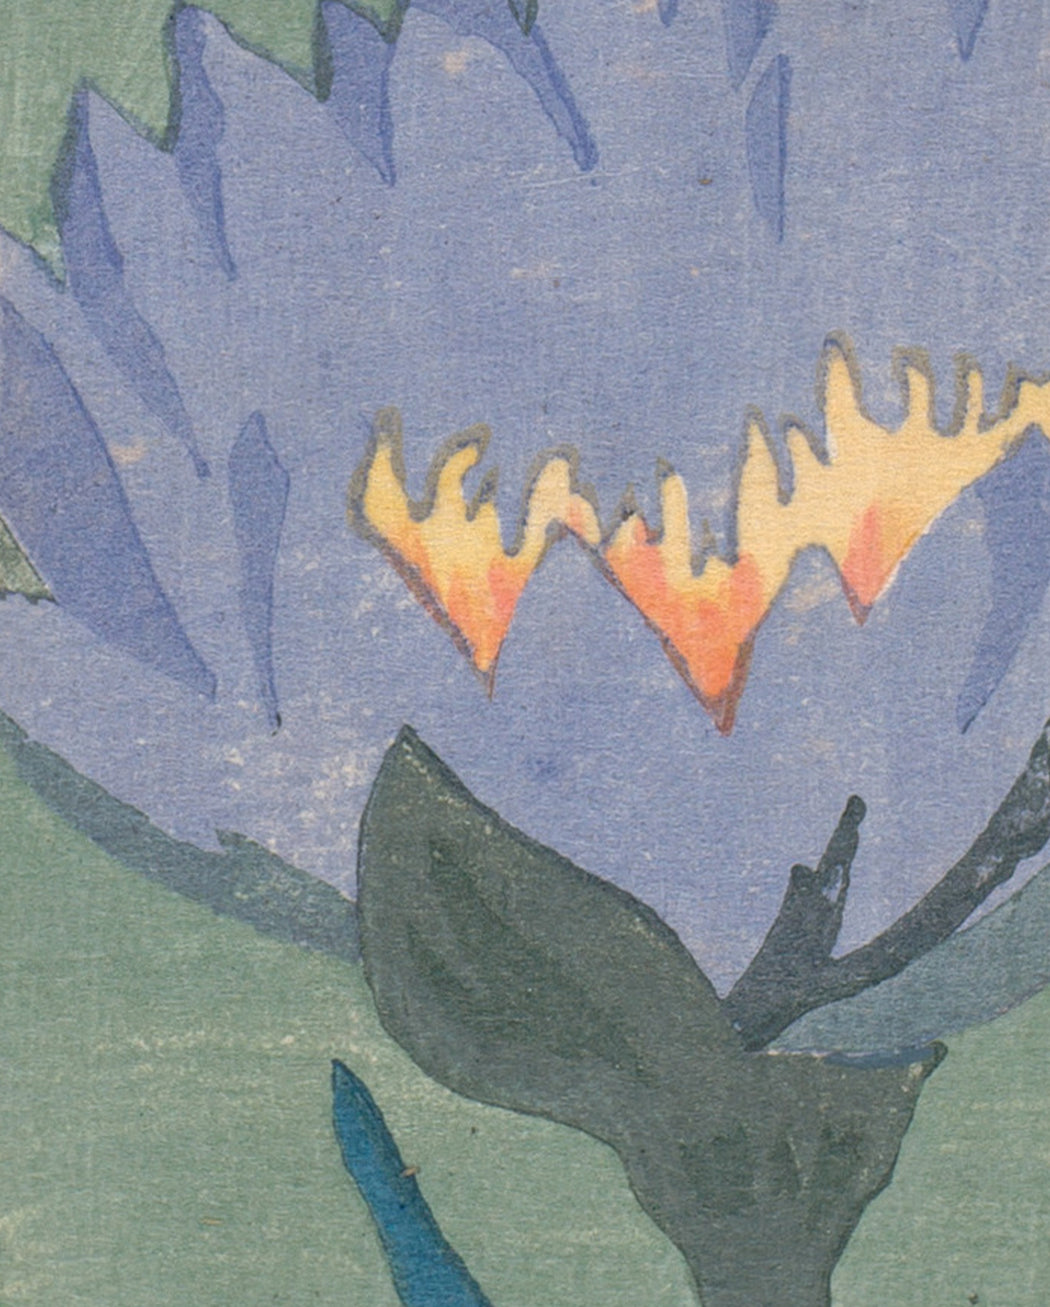 Arthur Wesley Dow: Lily Bookmark_Zoom